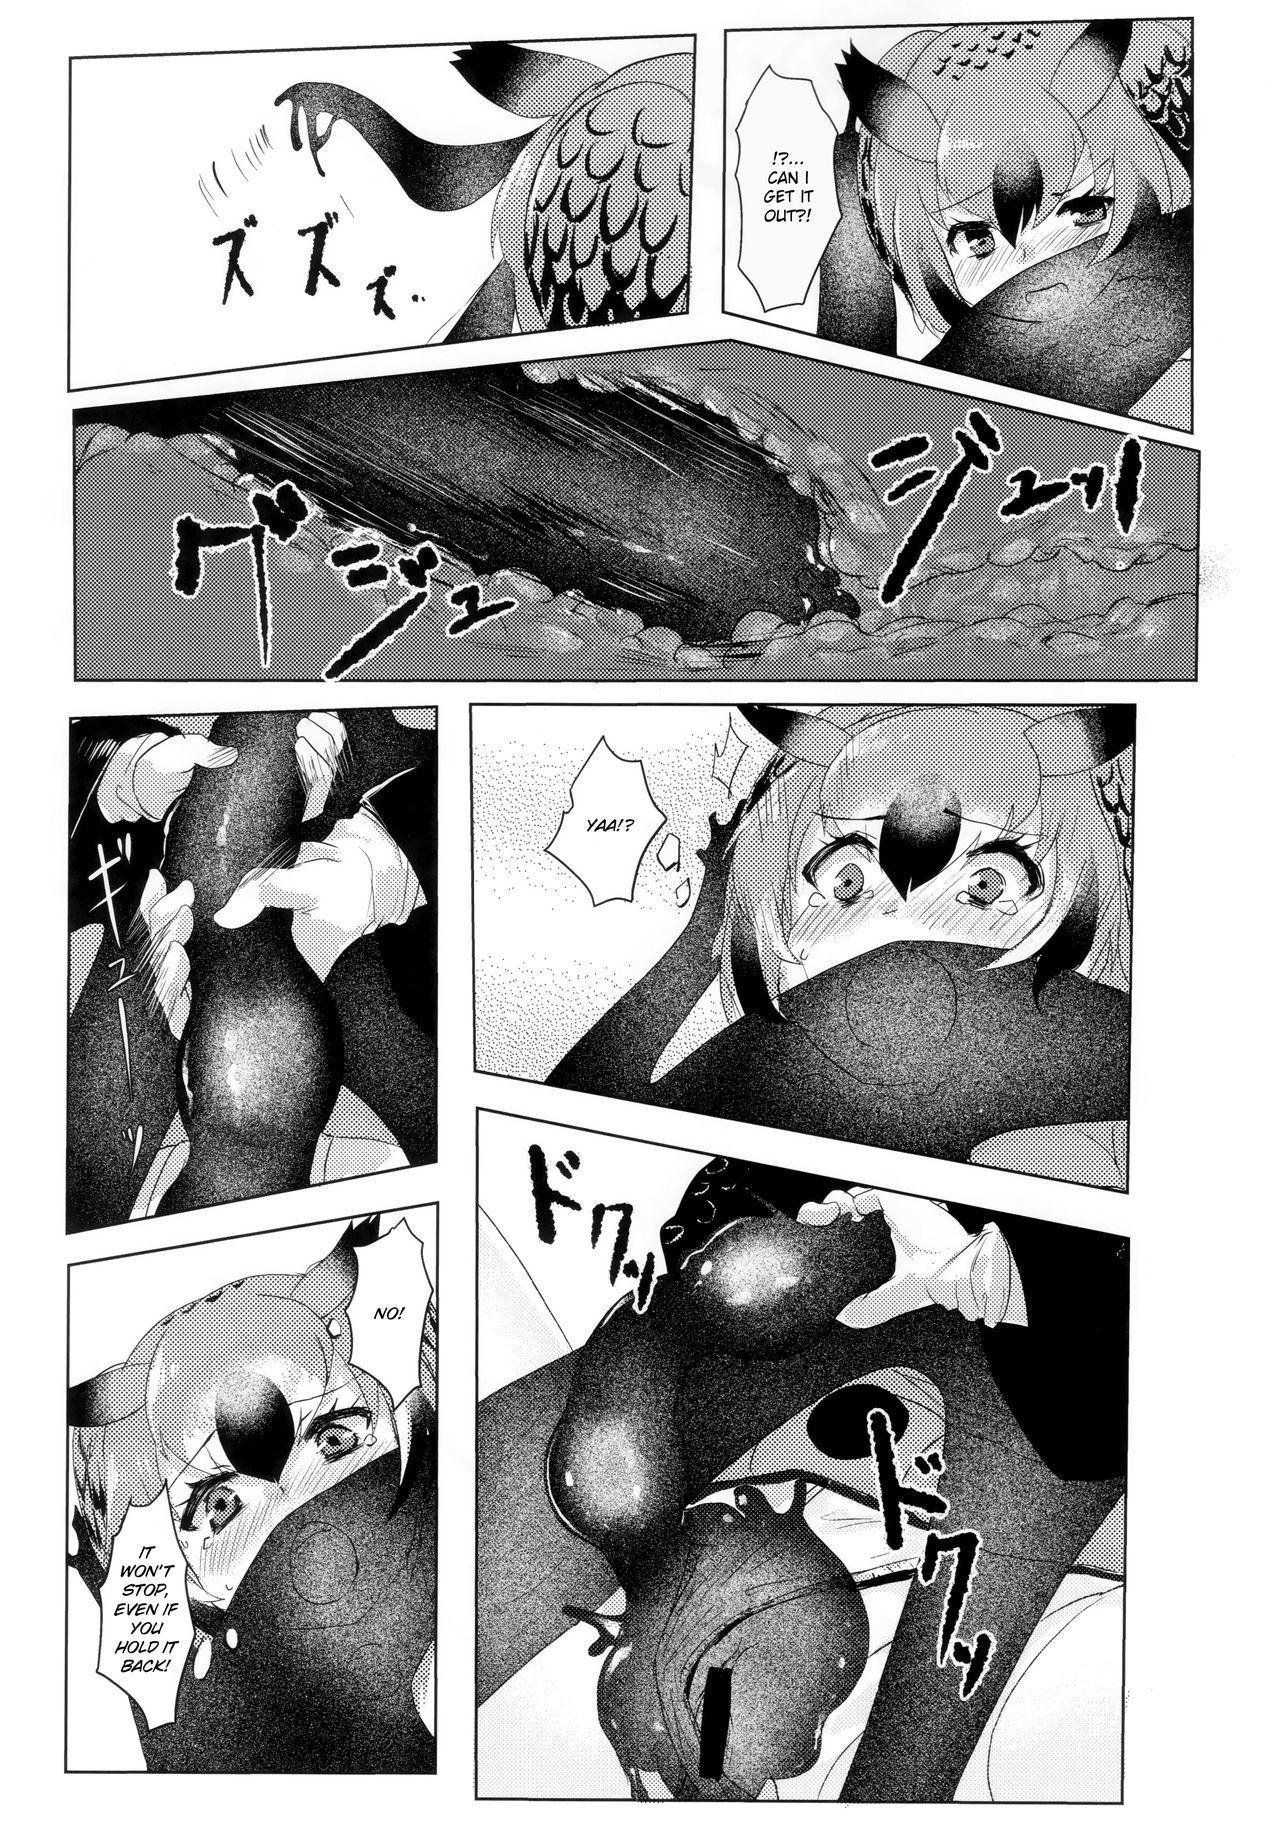 Muscle CURIOSITY - Kemono friends Monster Dick - Page 11